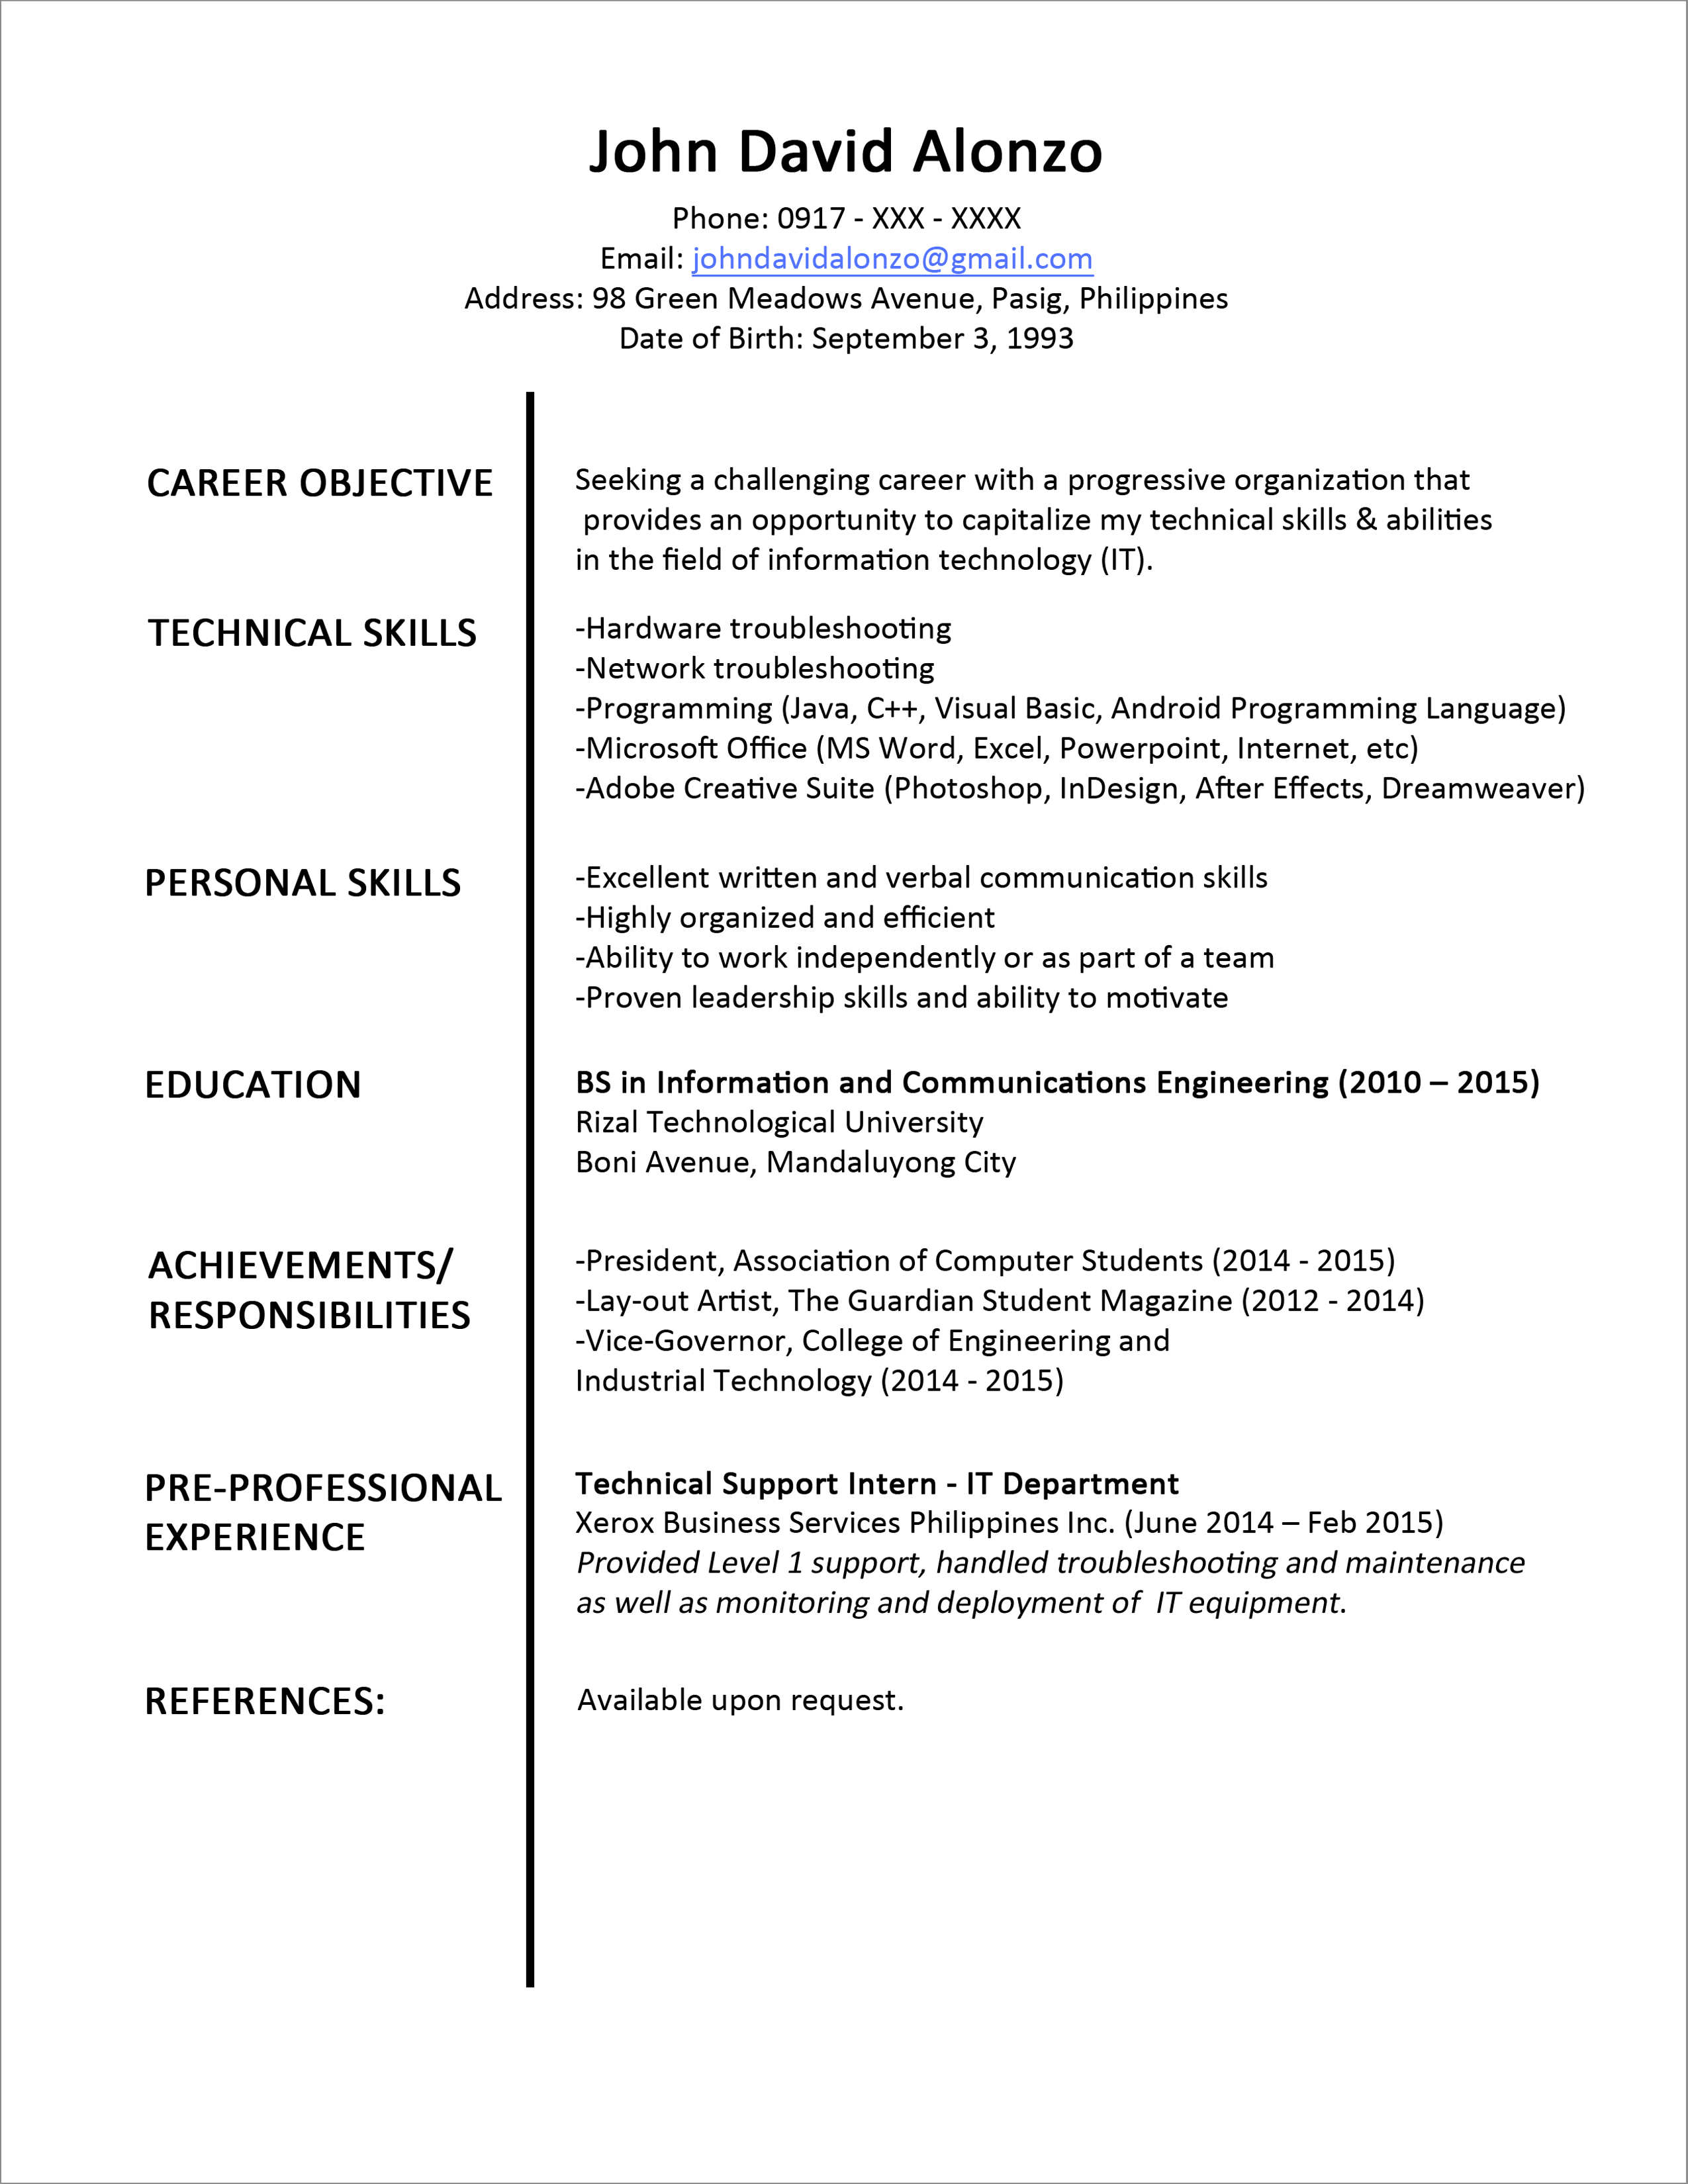 Resume Tips Templates Resume Templates You Can Download Jobstreet Philippines